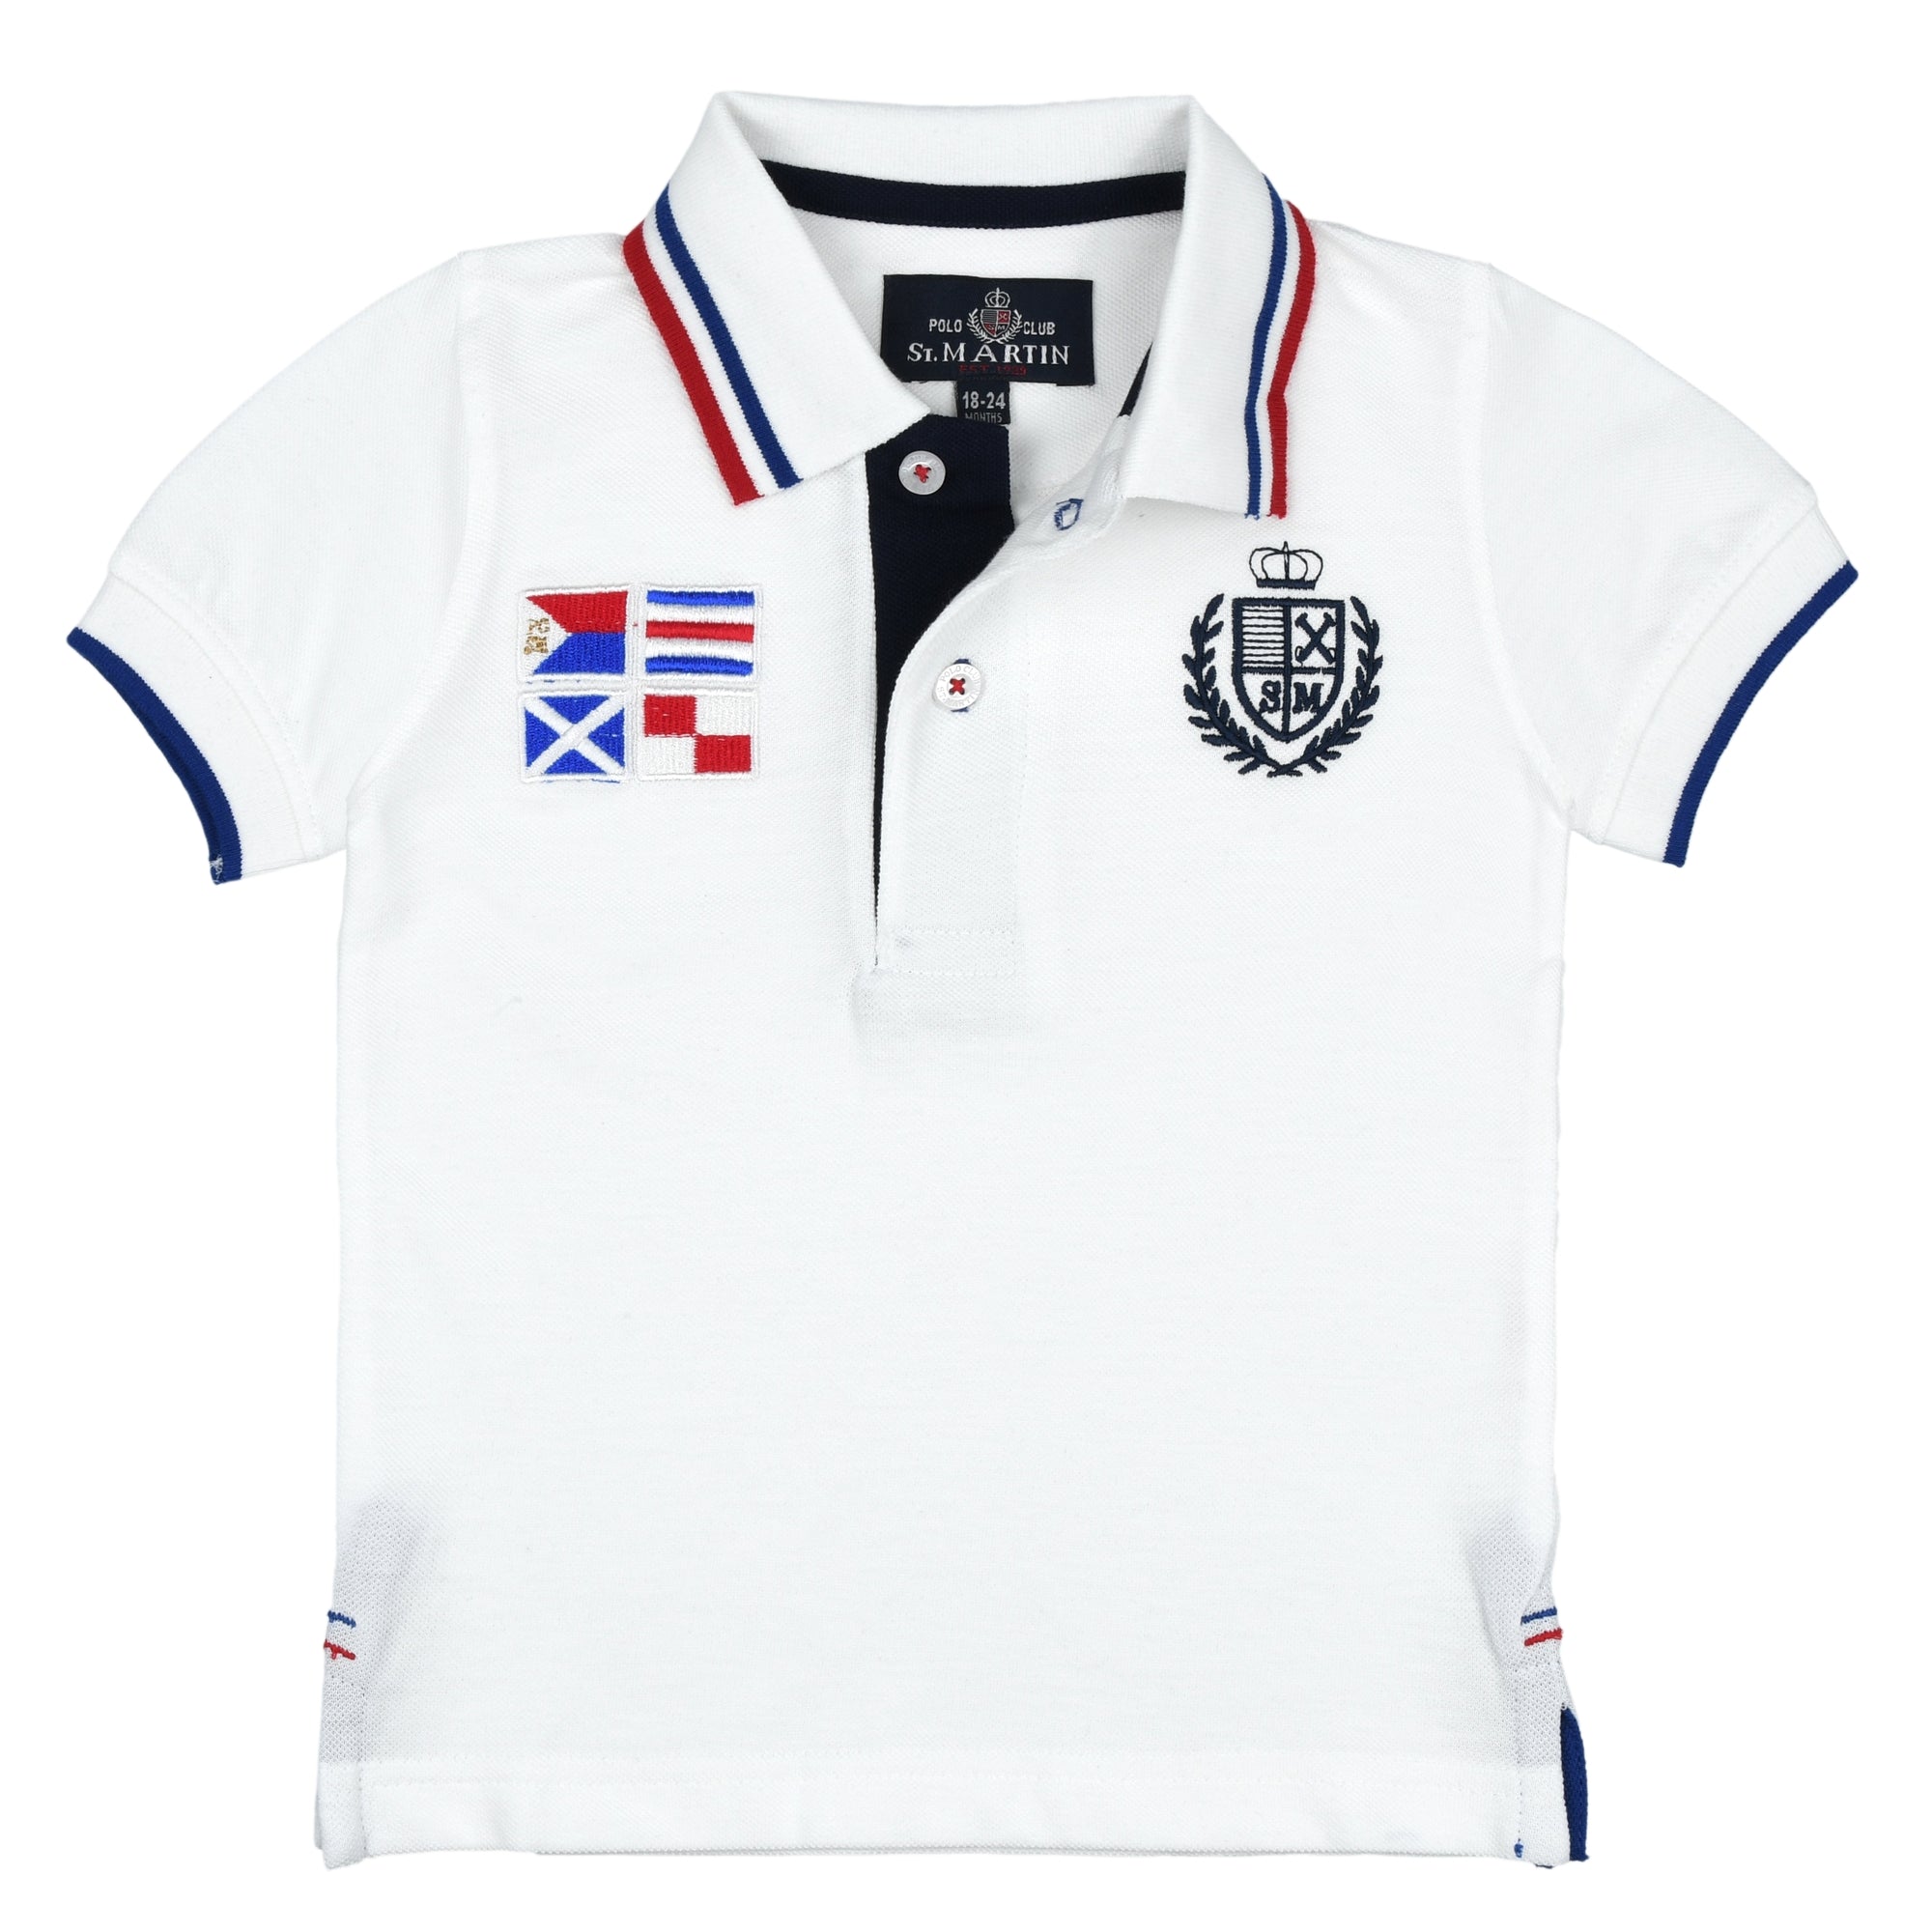 Piquet polo shirt with contrasting profiles and logo embroidery